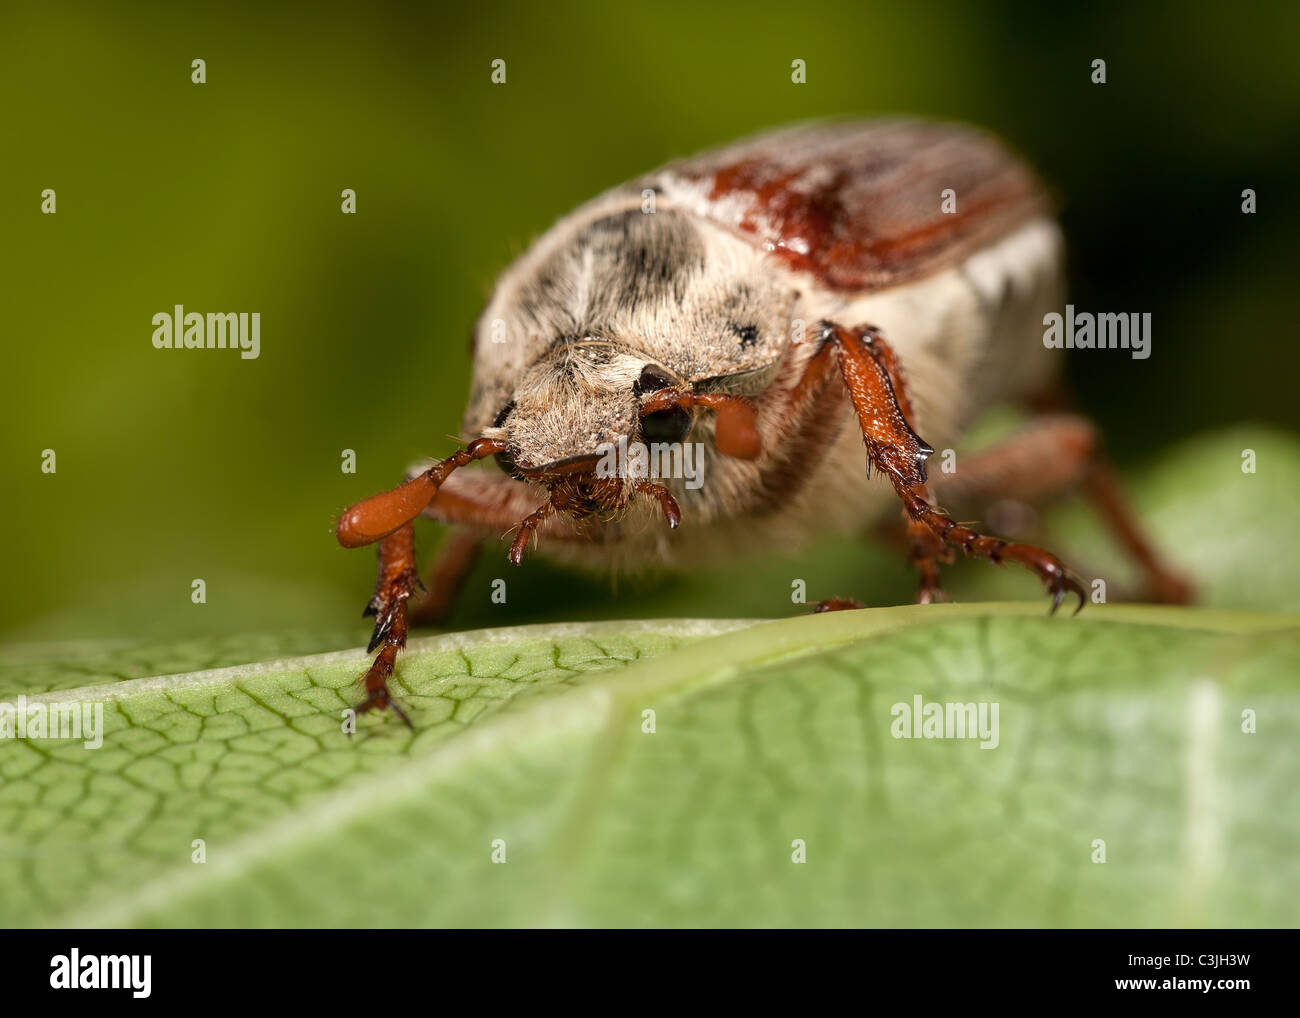 A Cockchafer Beetle or May Bug - melolontha melolontha, on a leaf. Stock Photo